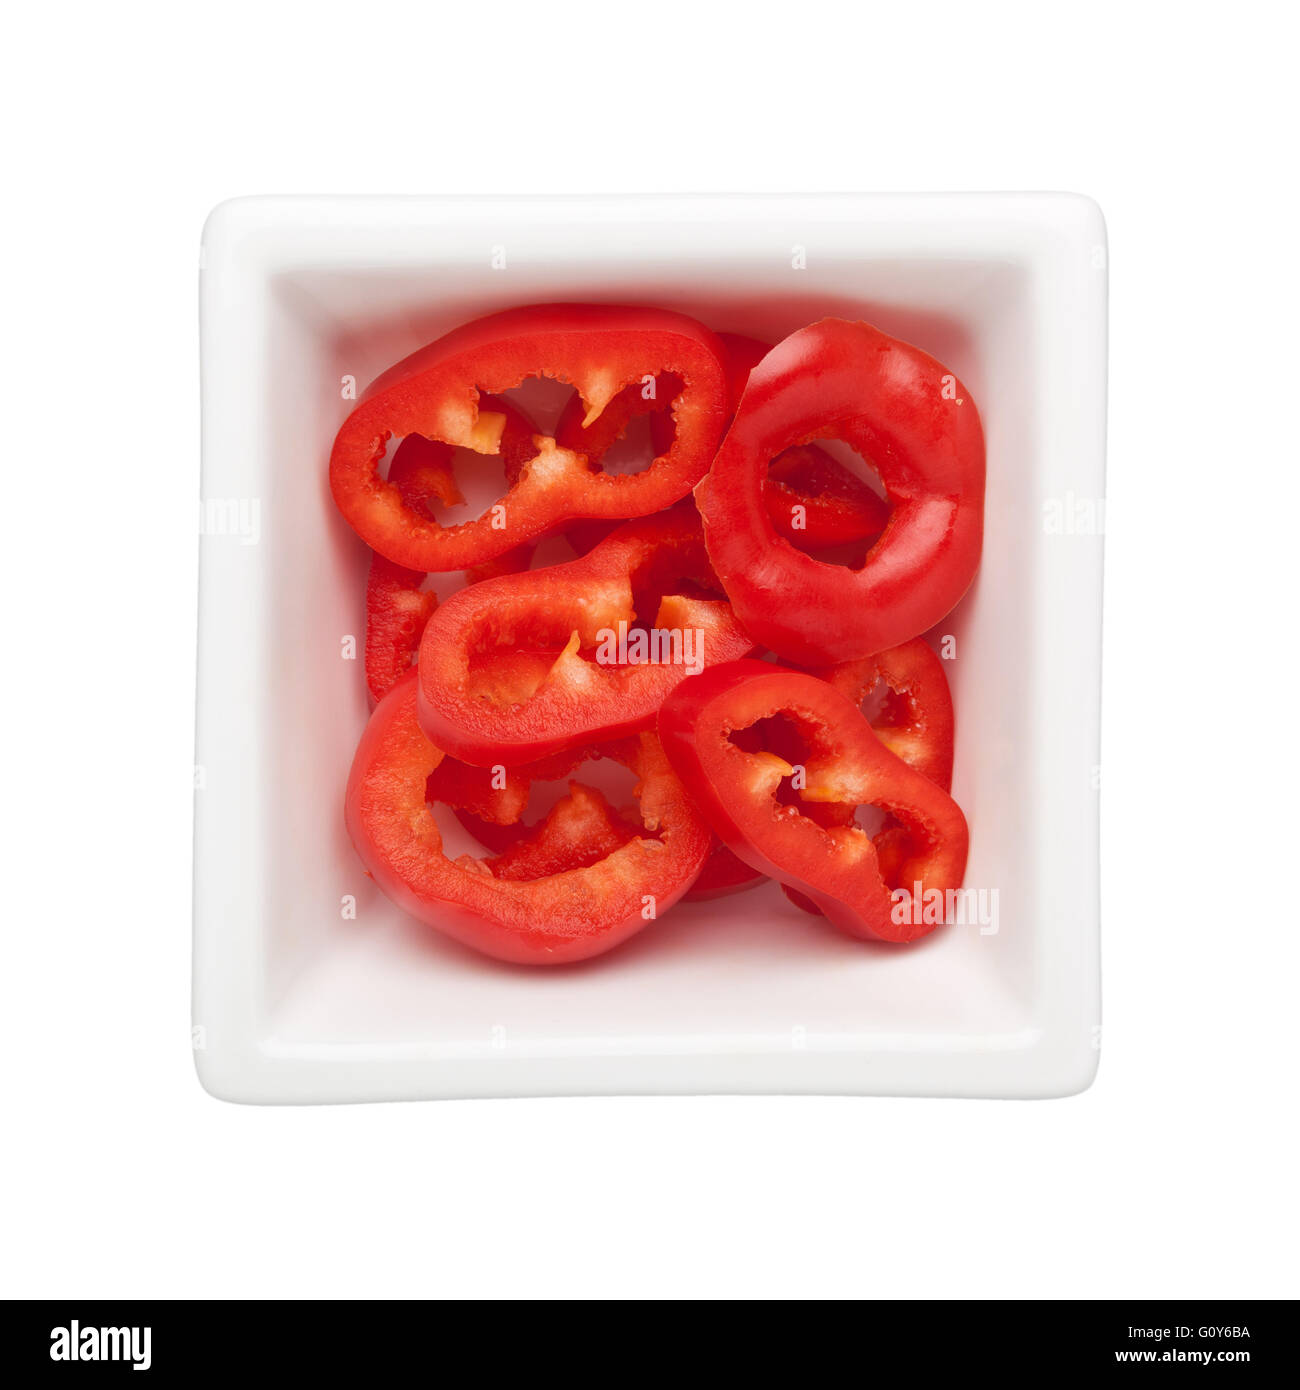 Sliced red bell pepper in a square bowl isolated on white background Stock Photo